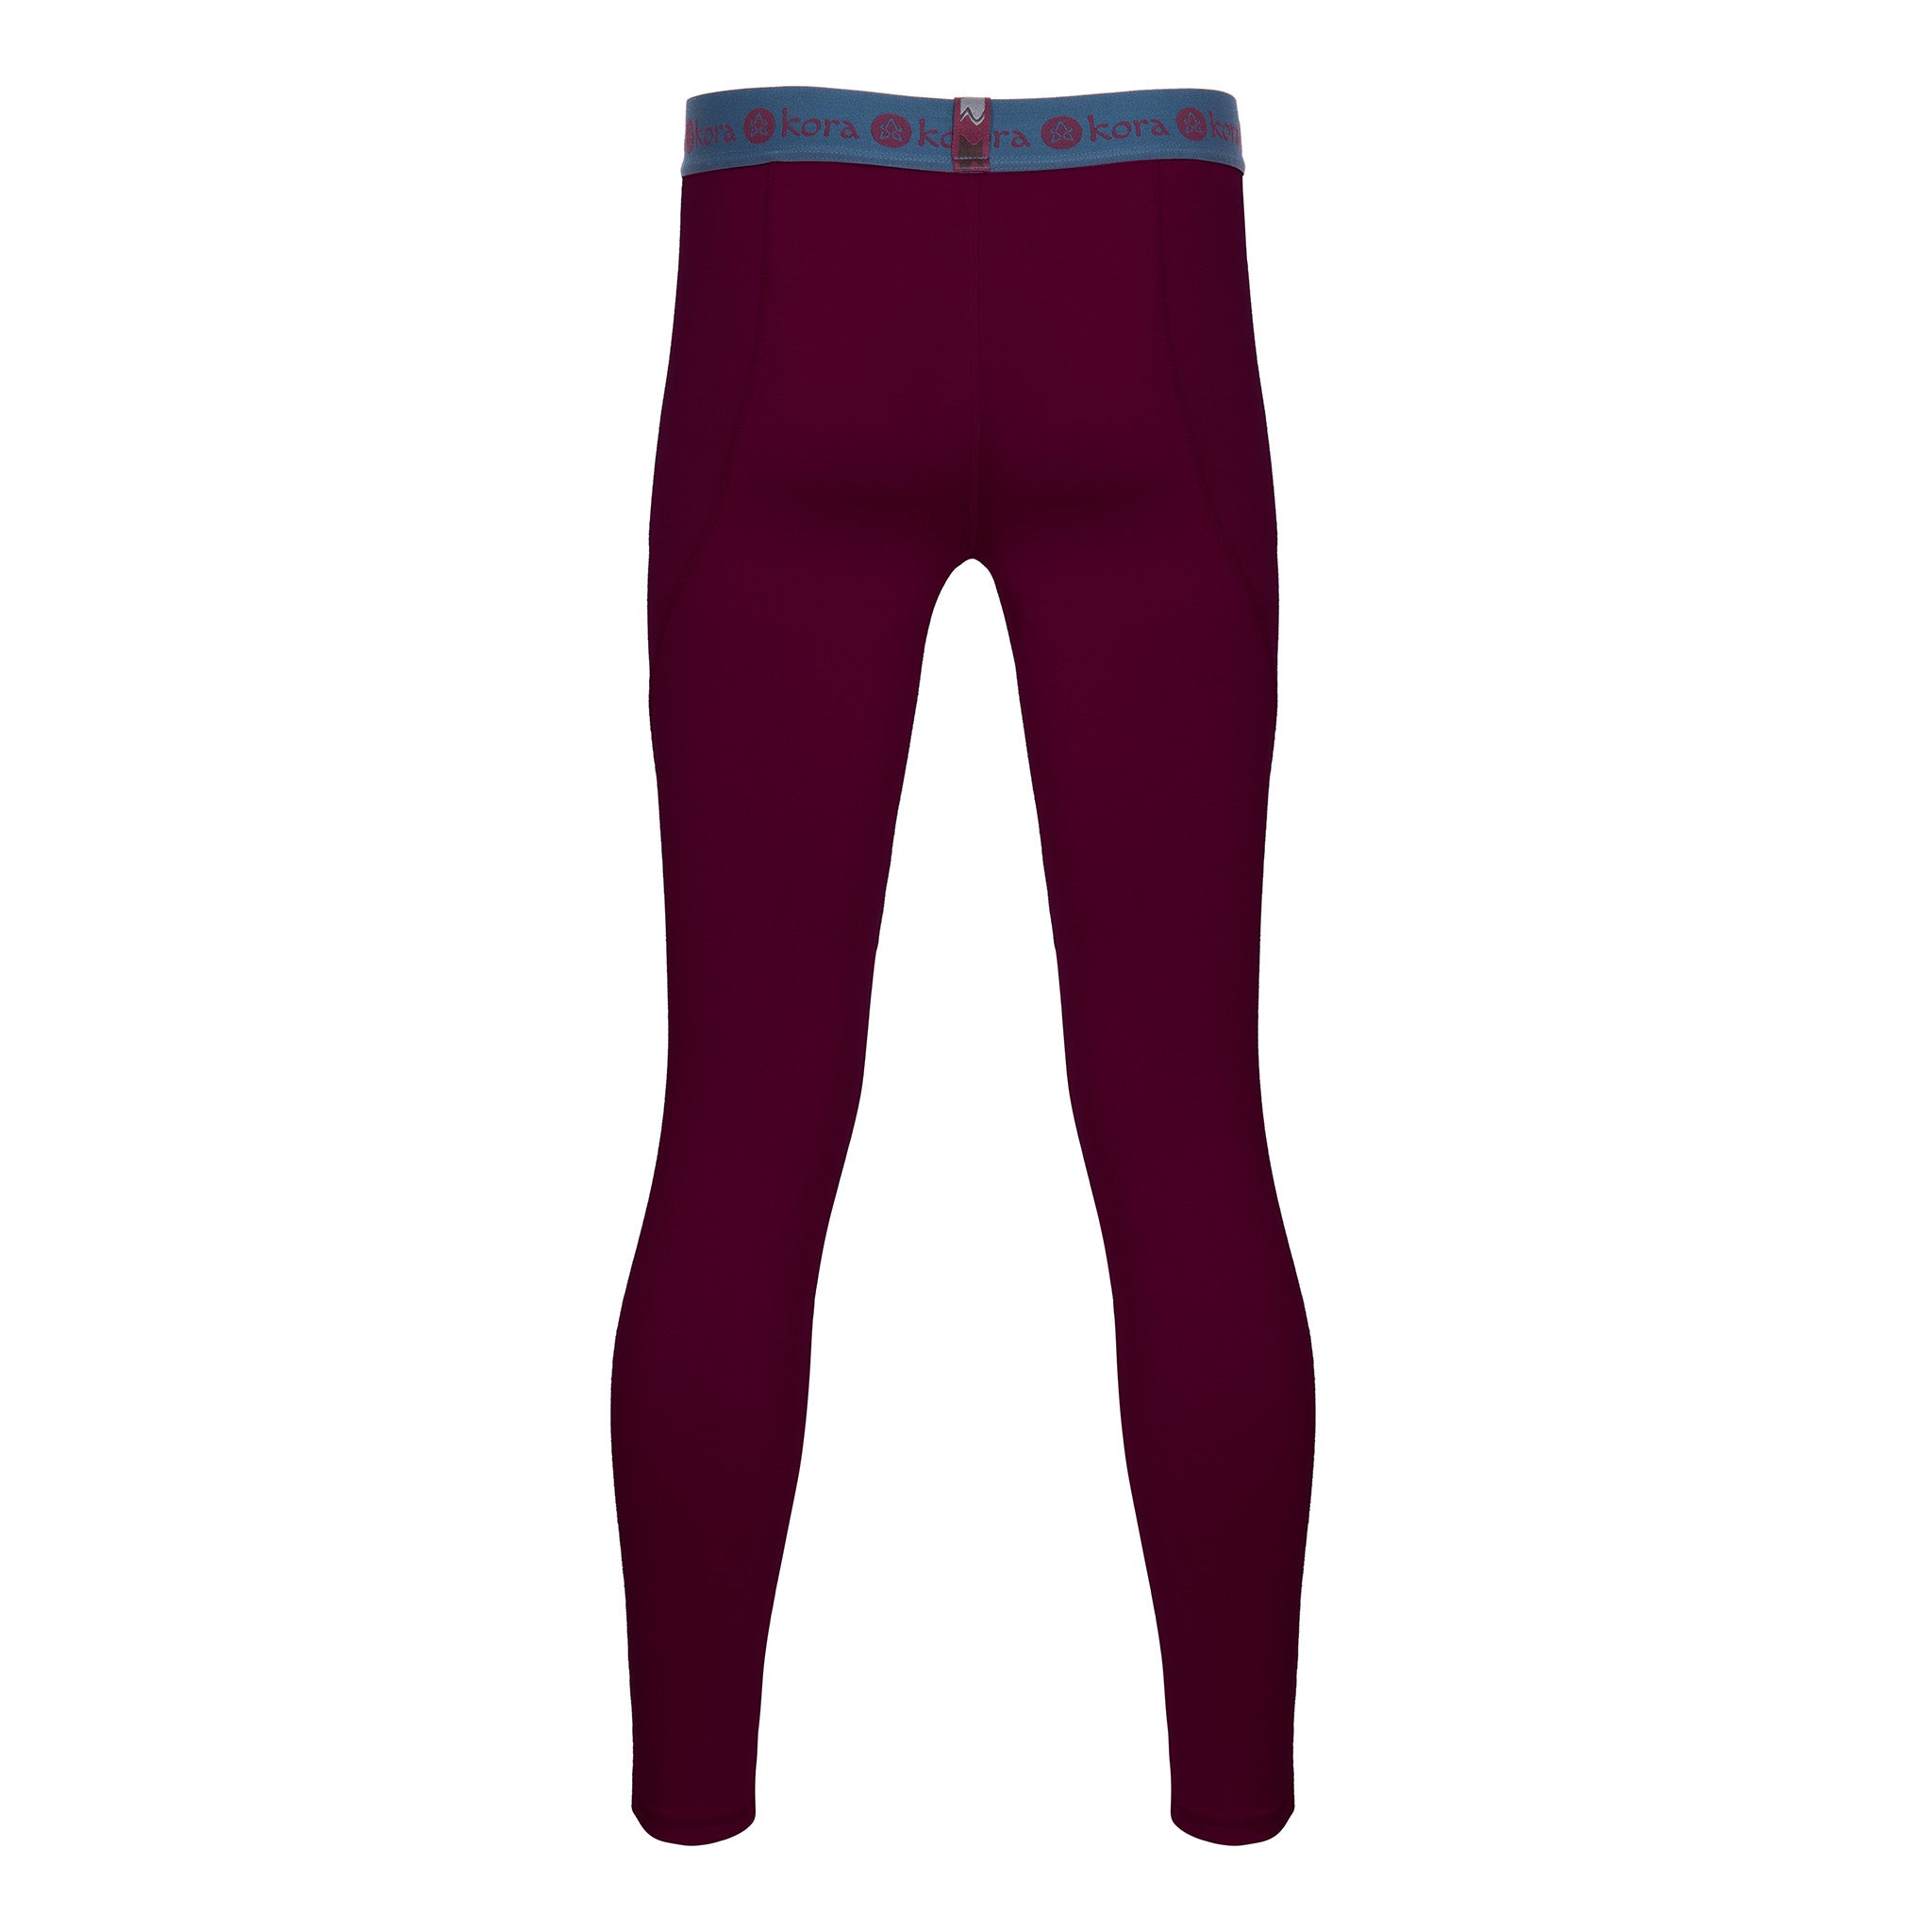 Champion Duo Dry Base Layer Leggings  Champion duo dry, Clothes design,  Cold weather activities